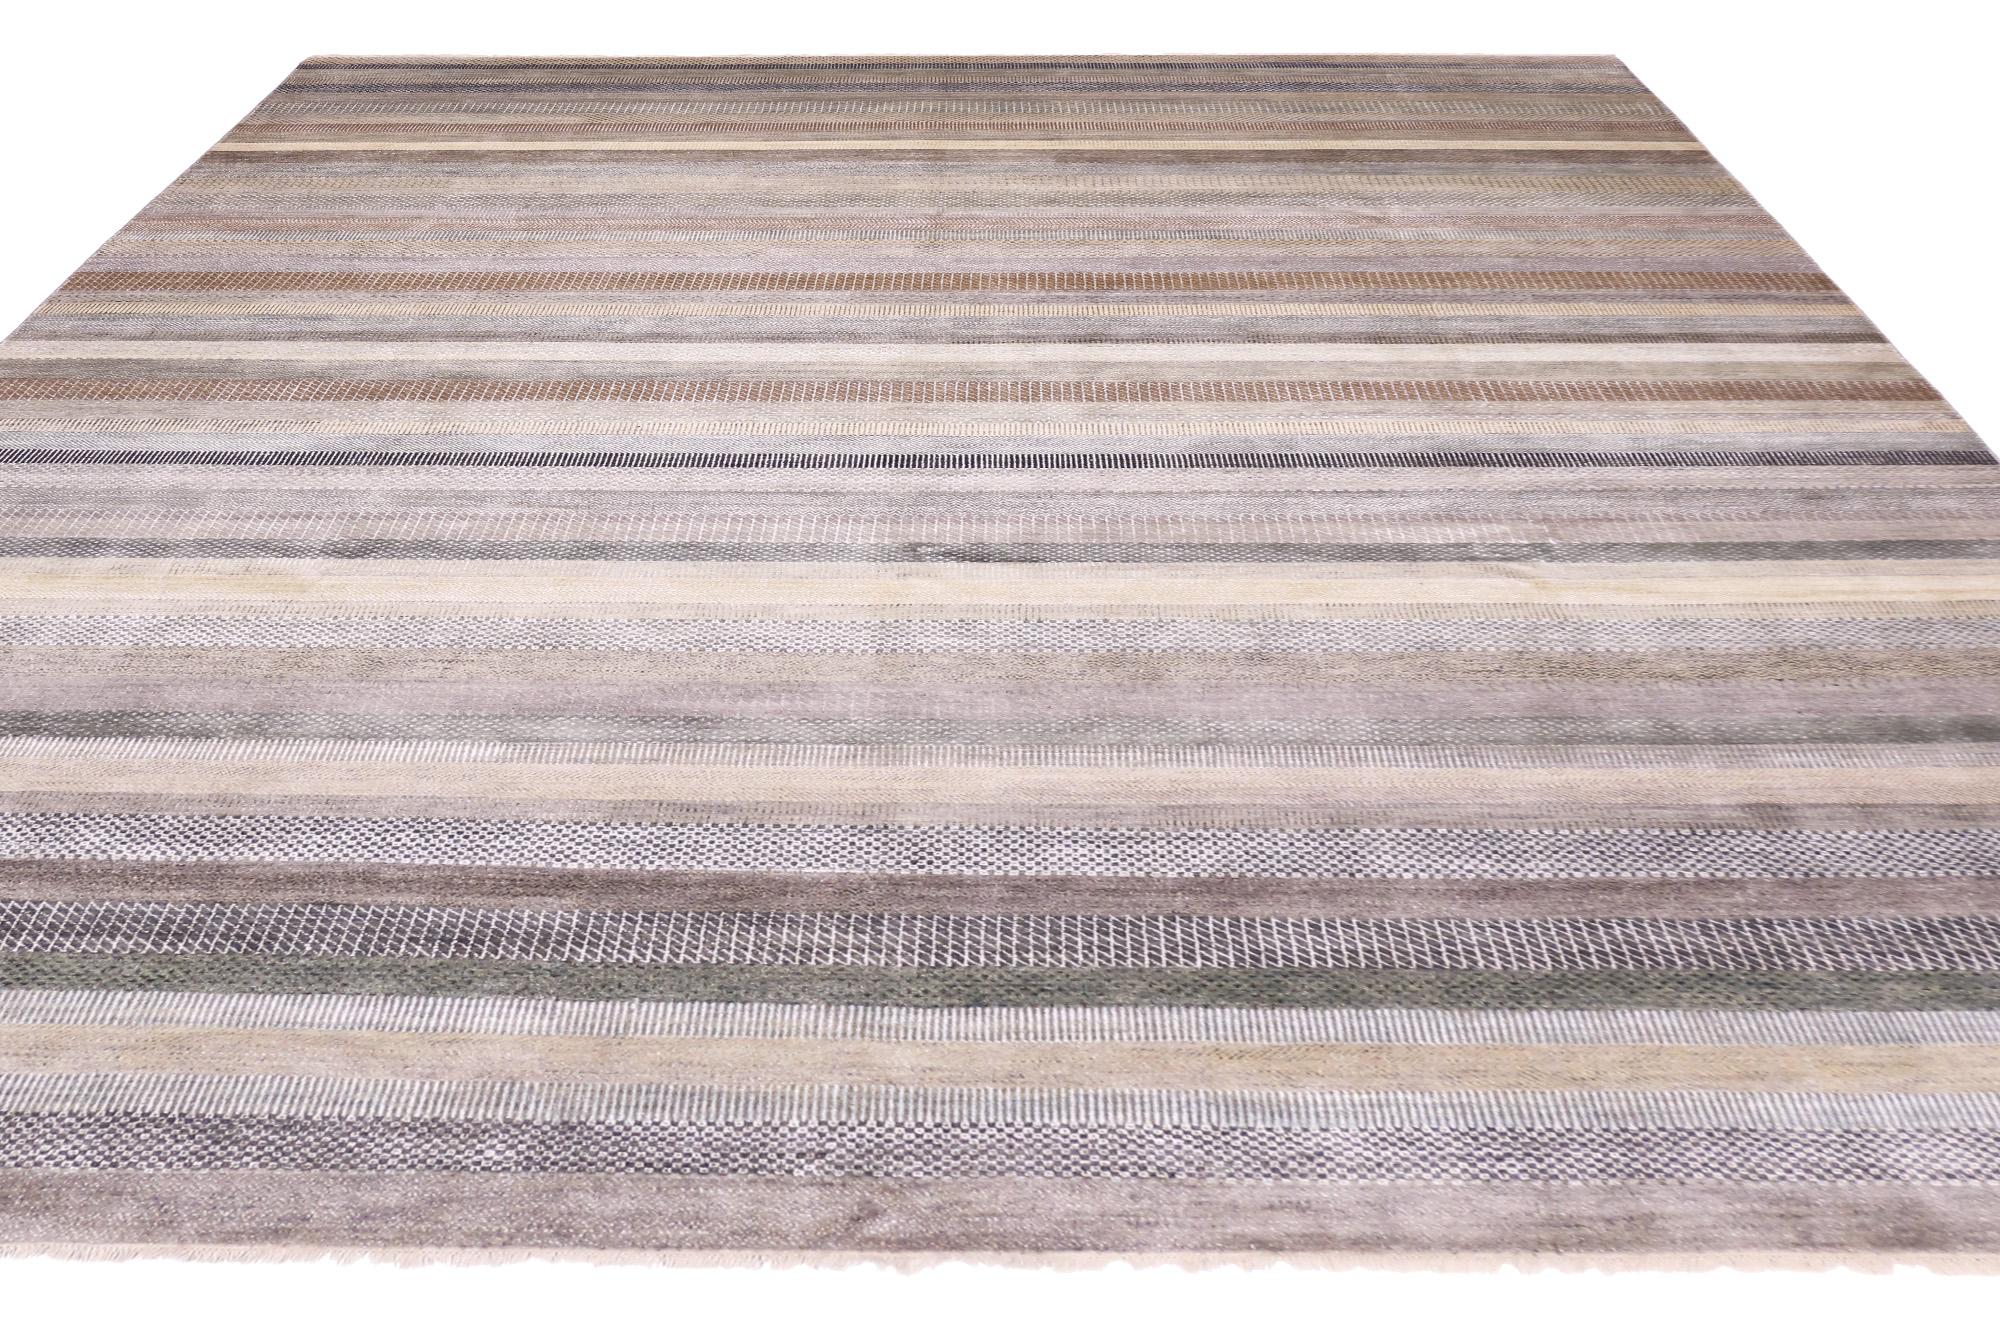 30013 New Transitional Striped Area Rug, 09'10 x 14'01. Transitional Indian wool and silk rugs are exquisite handcrafted carpets that blend traditional Indian weaving techniques with contemporary design elements. These rugs typically feature a